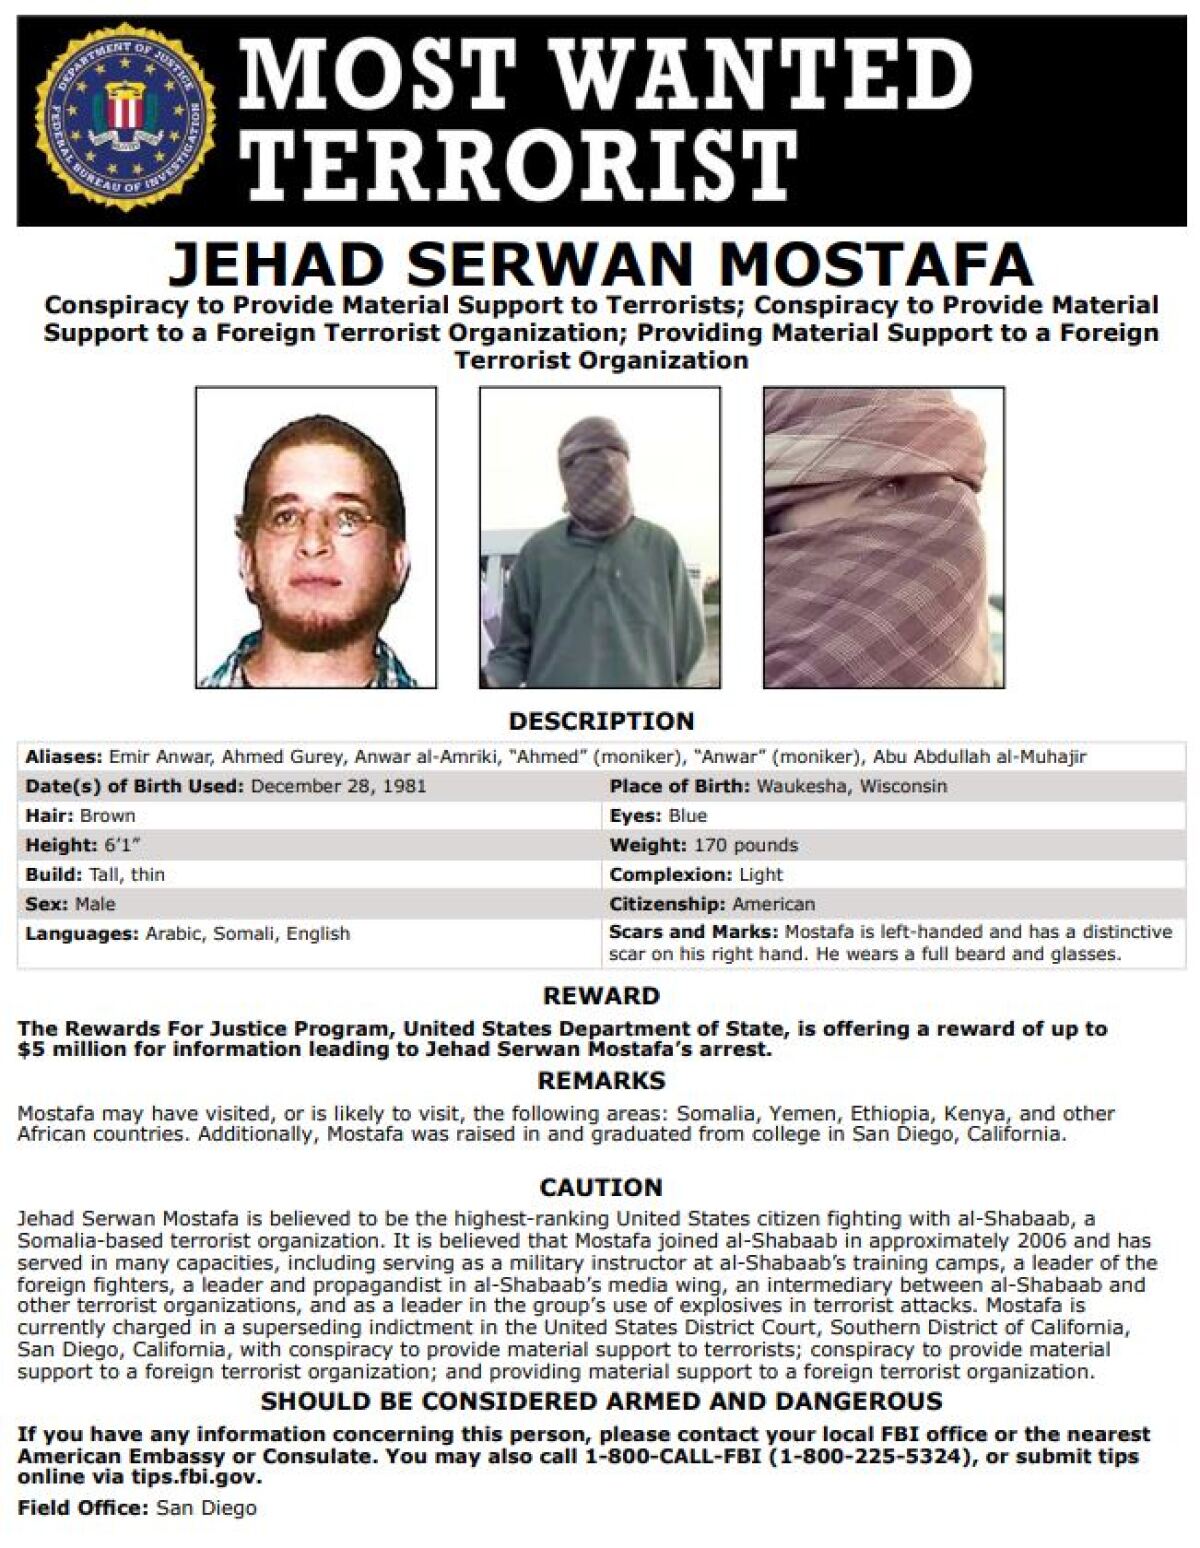 The FBI says Jehad Serwan Mostafa is a most wanted terrorist who grew up and attended high school and college in San Diego.